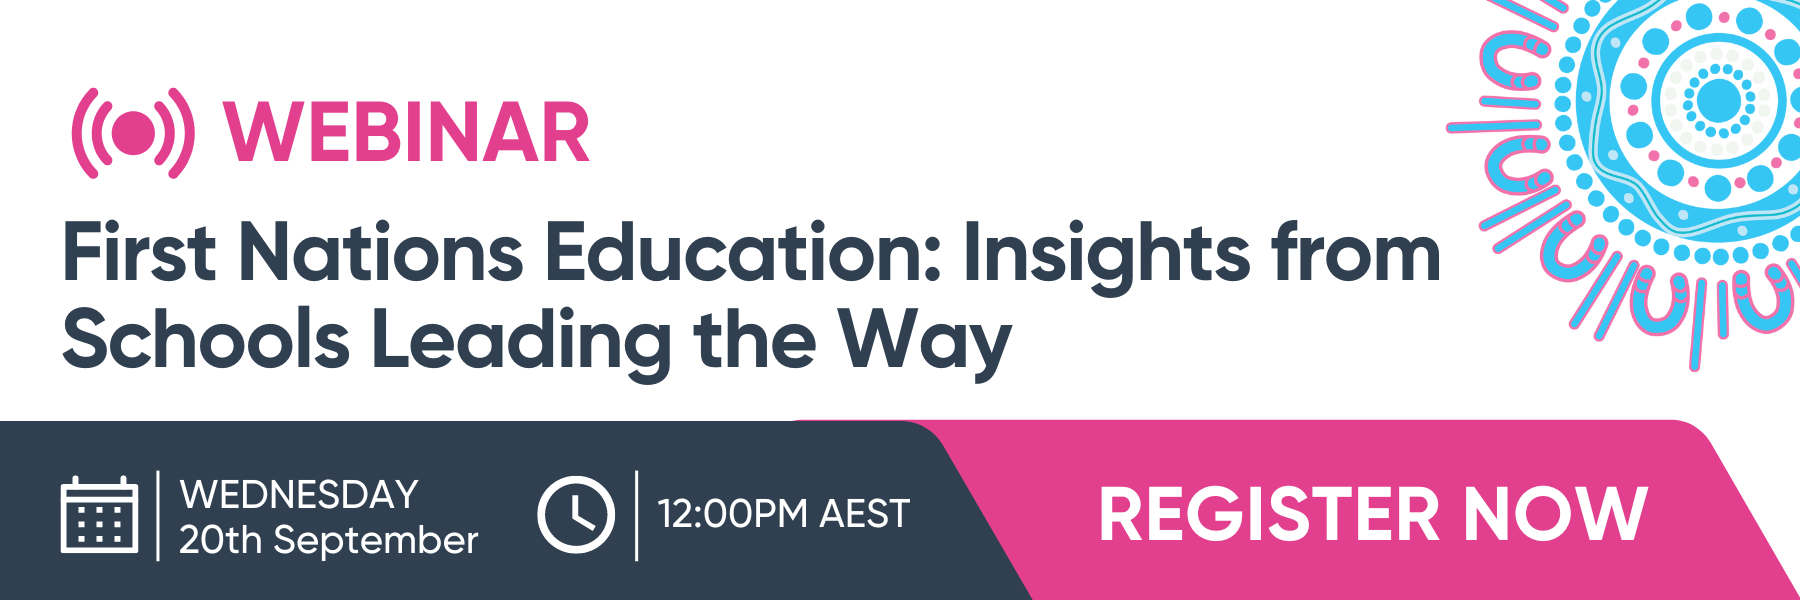 A banner promoting a webinar on First Nations Education: Insights from Schools Leading the Way